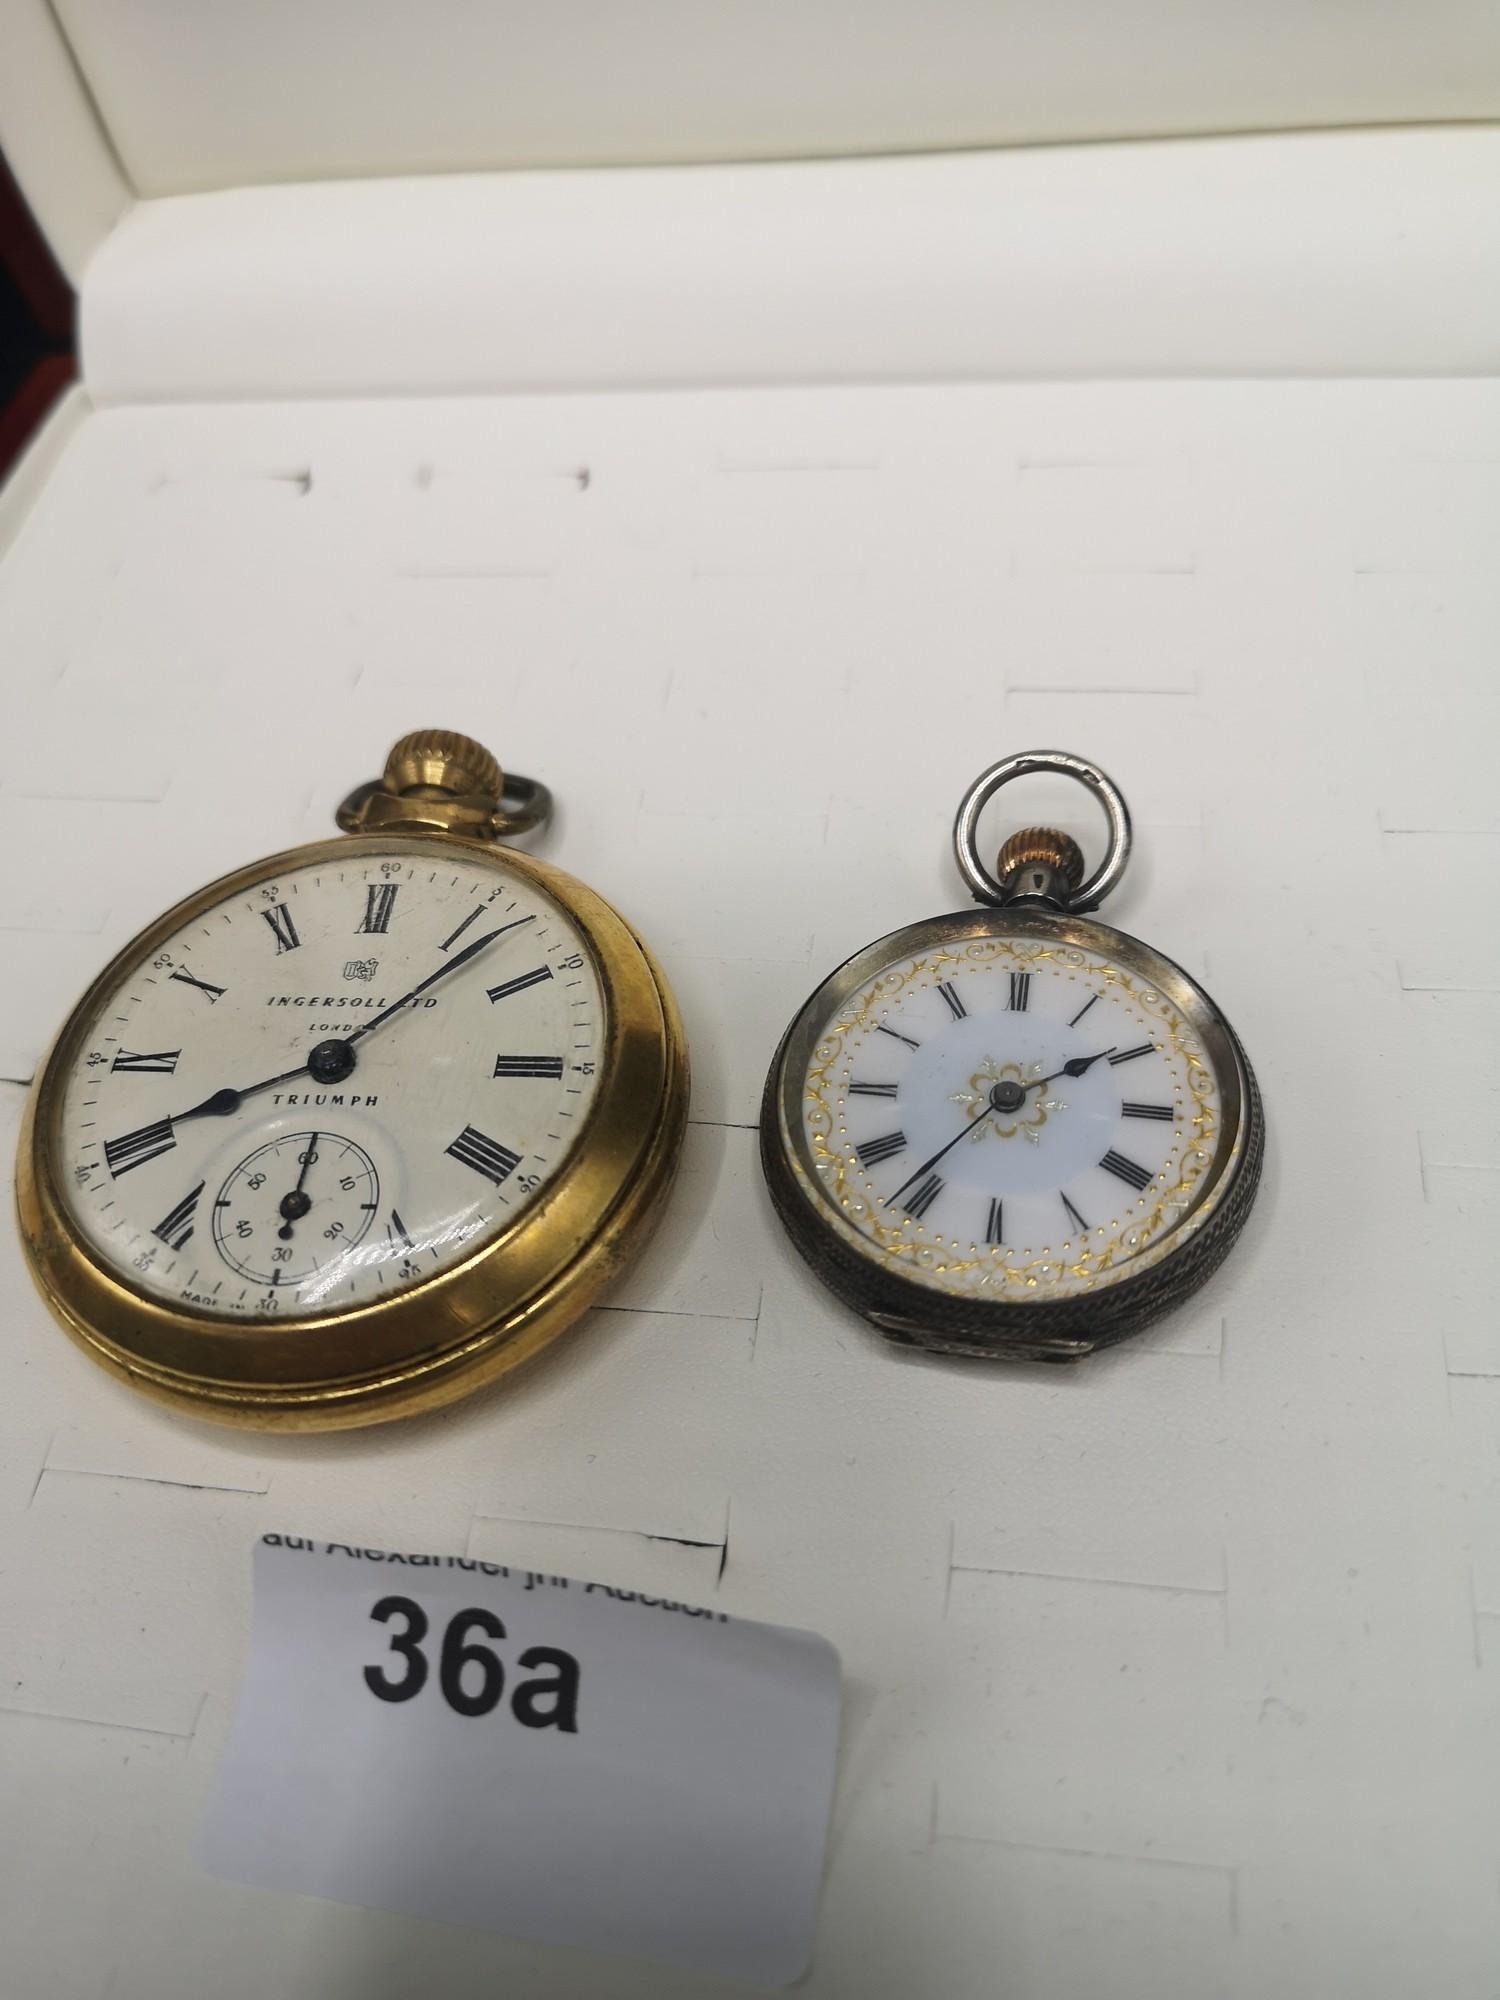 Ingersoll triumph London Ltd pocket watch needs service together with small Edwardian silver